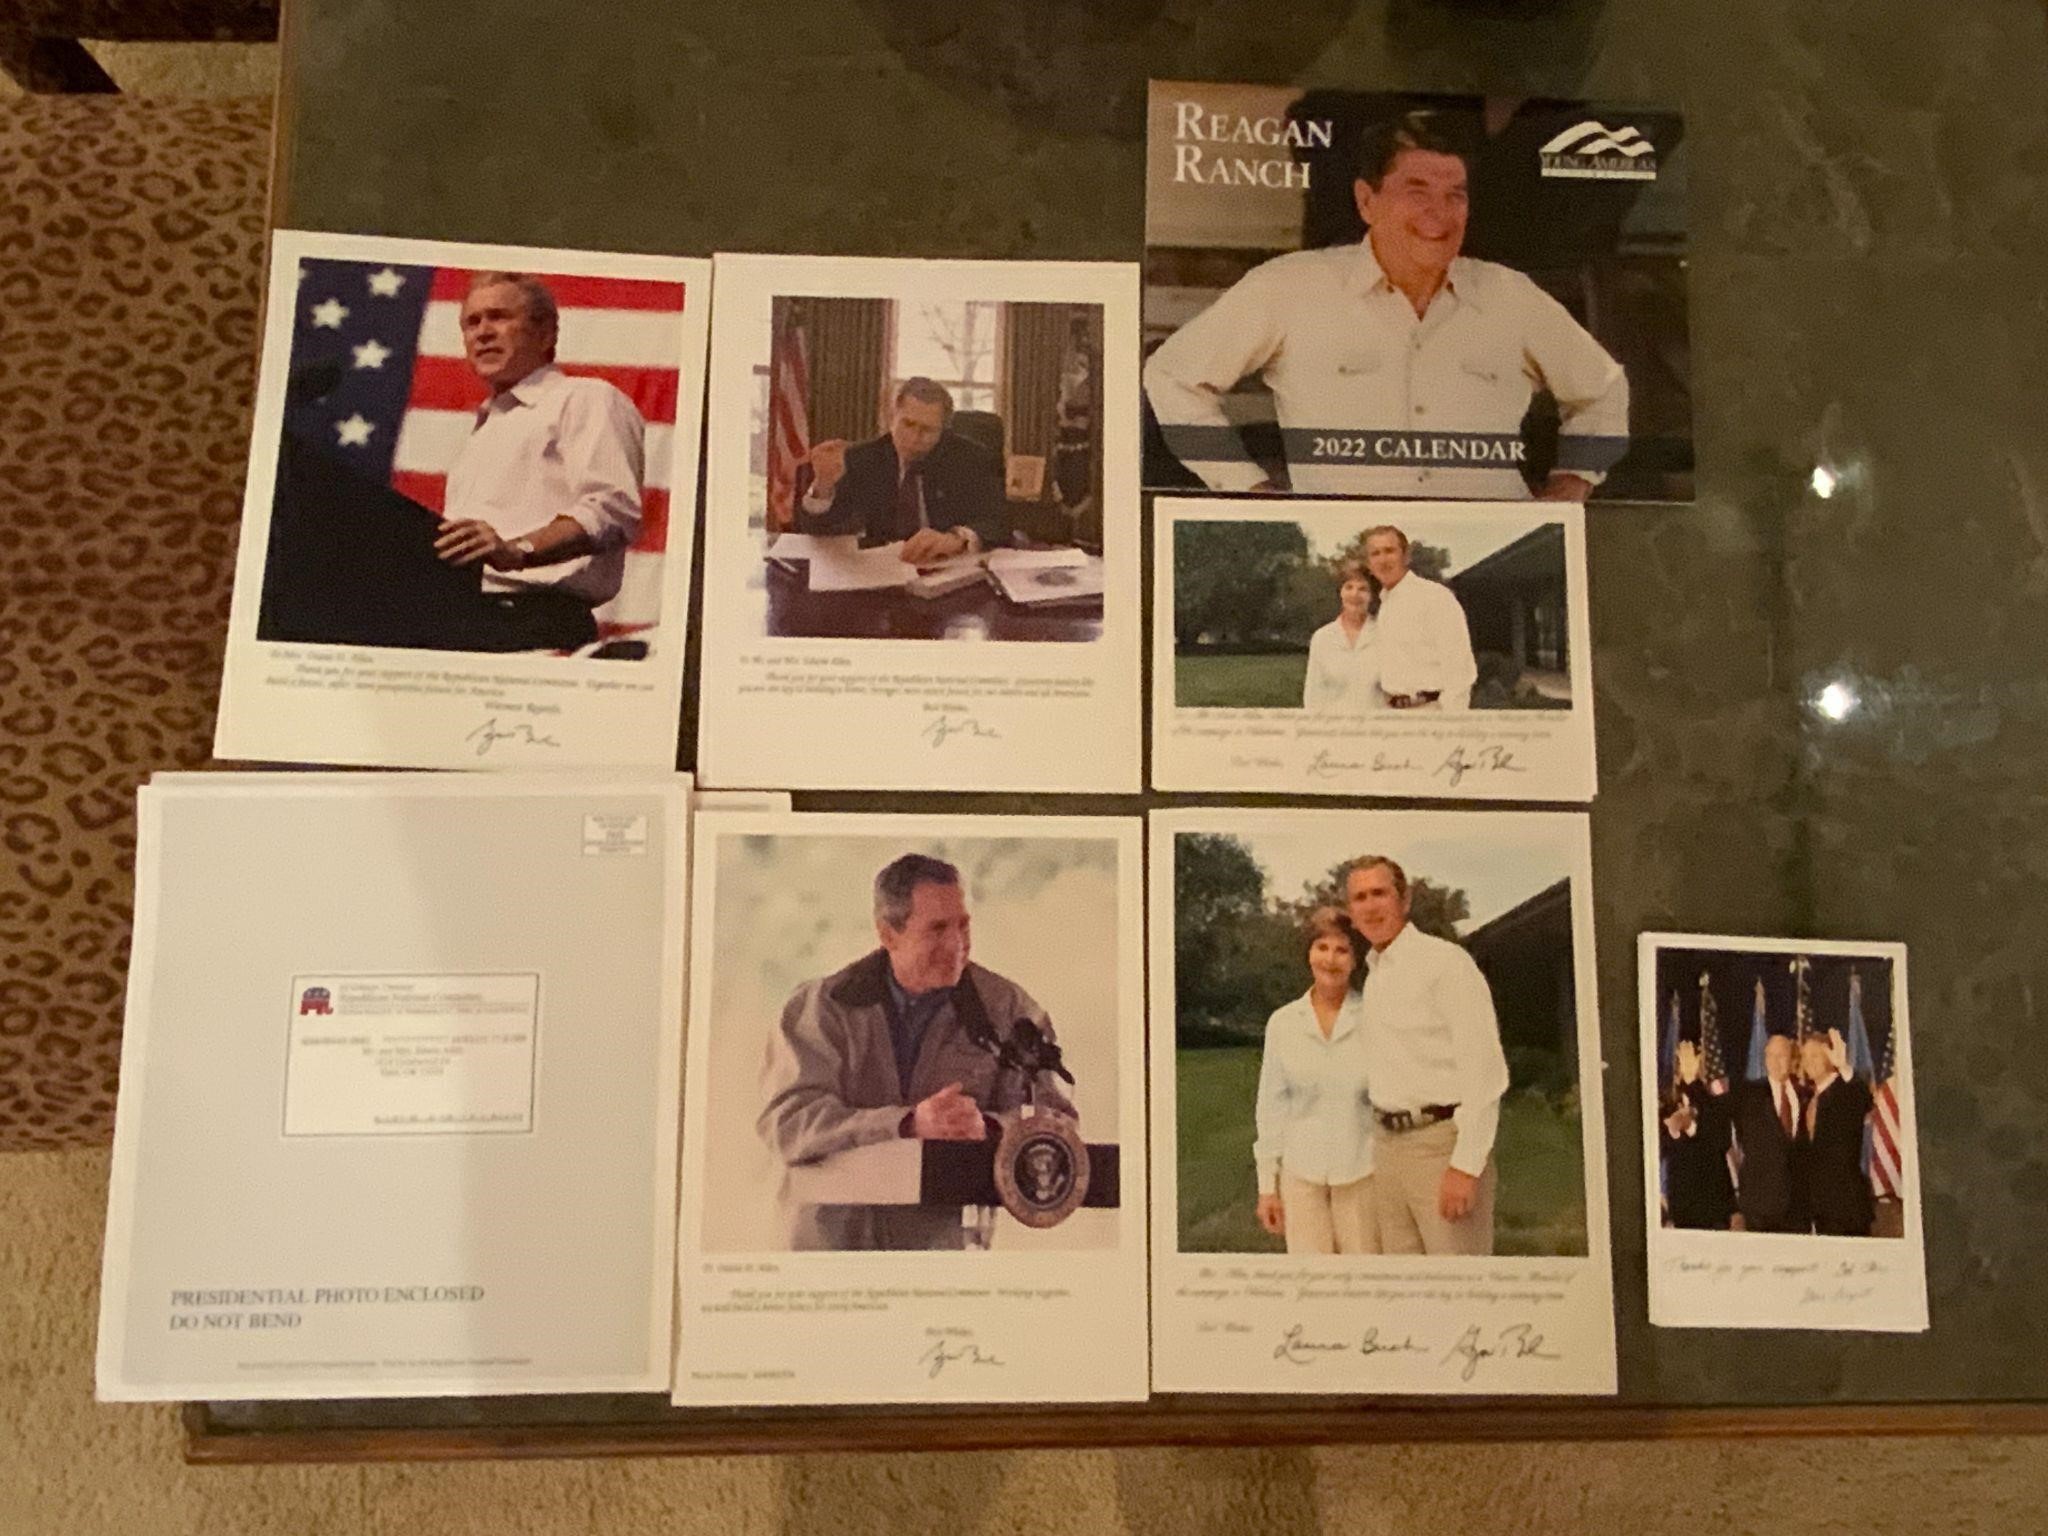 Auto Signed GOP Presidential Pictures & Calendar